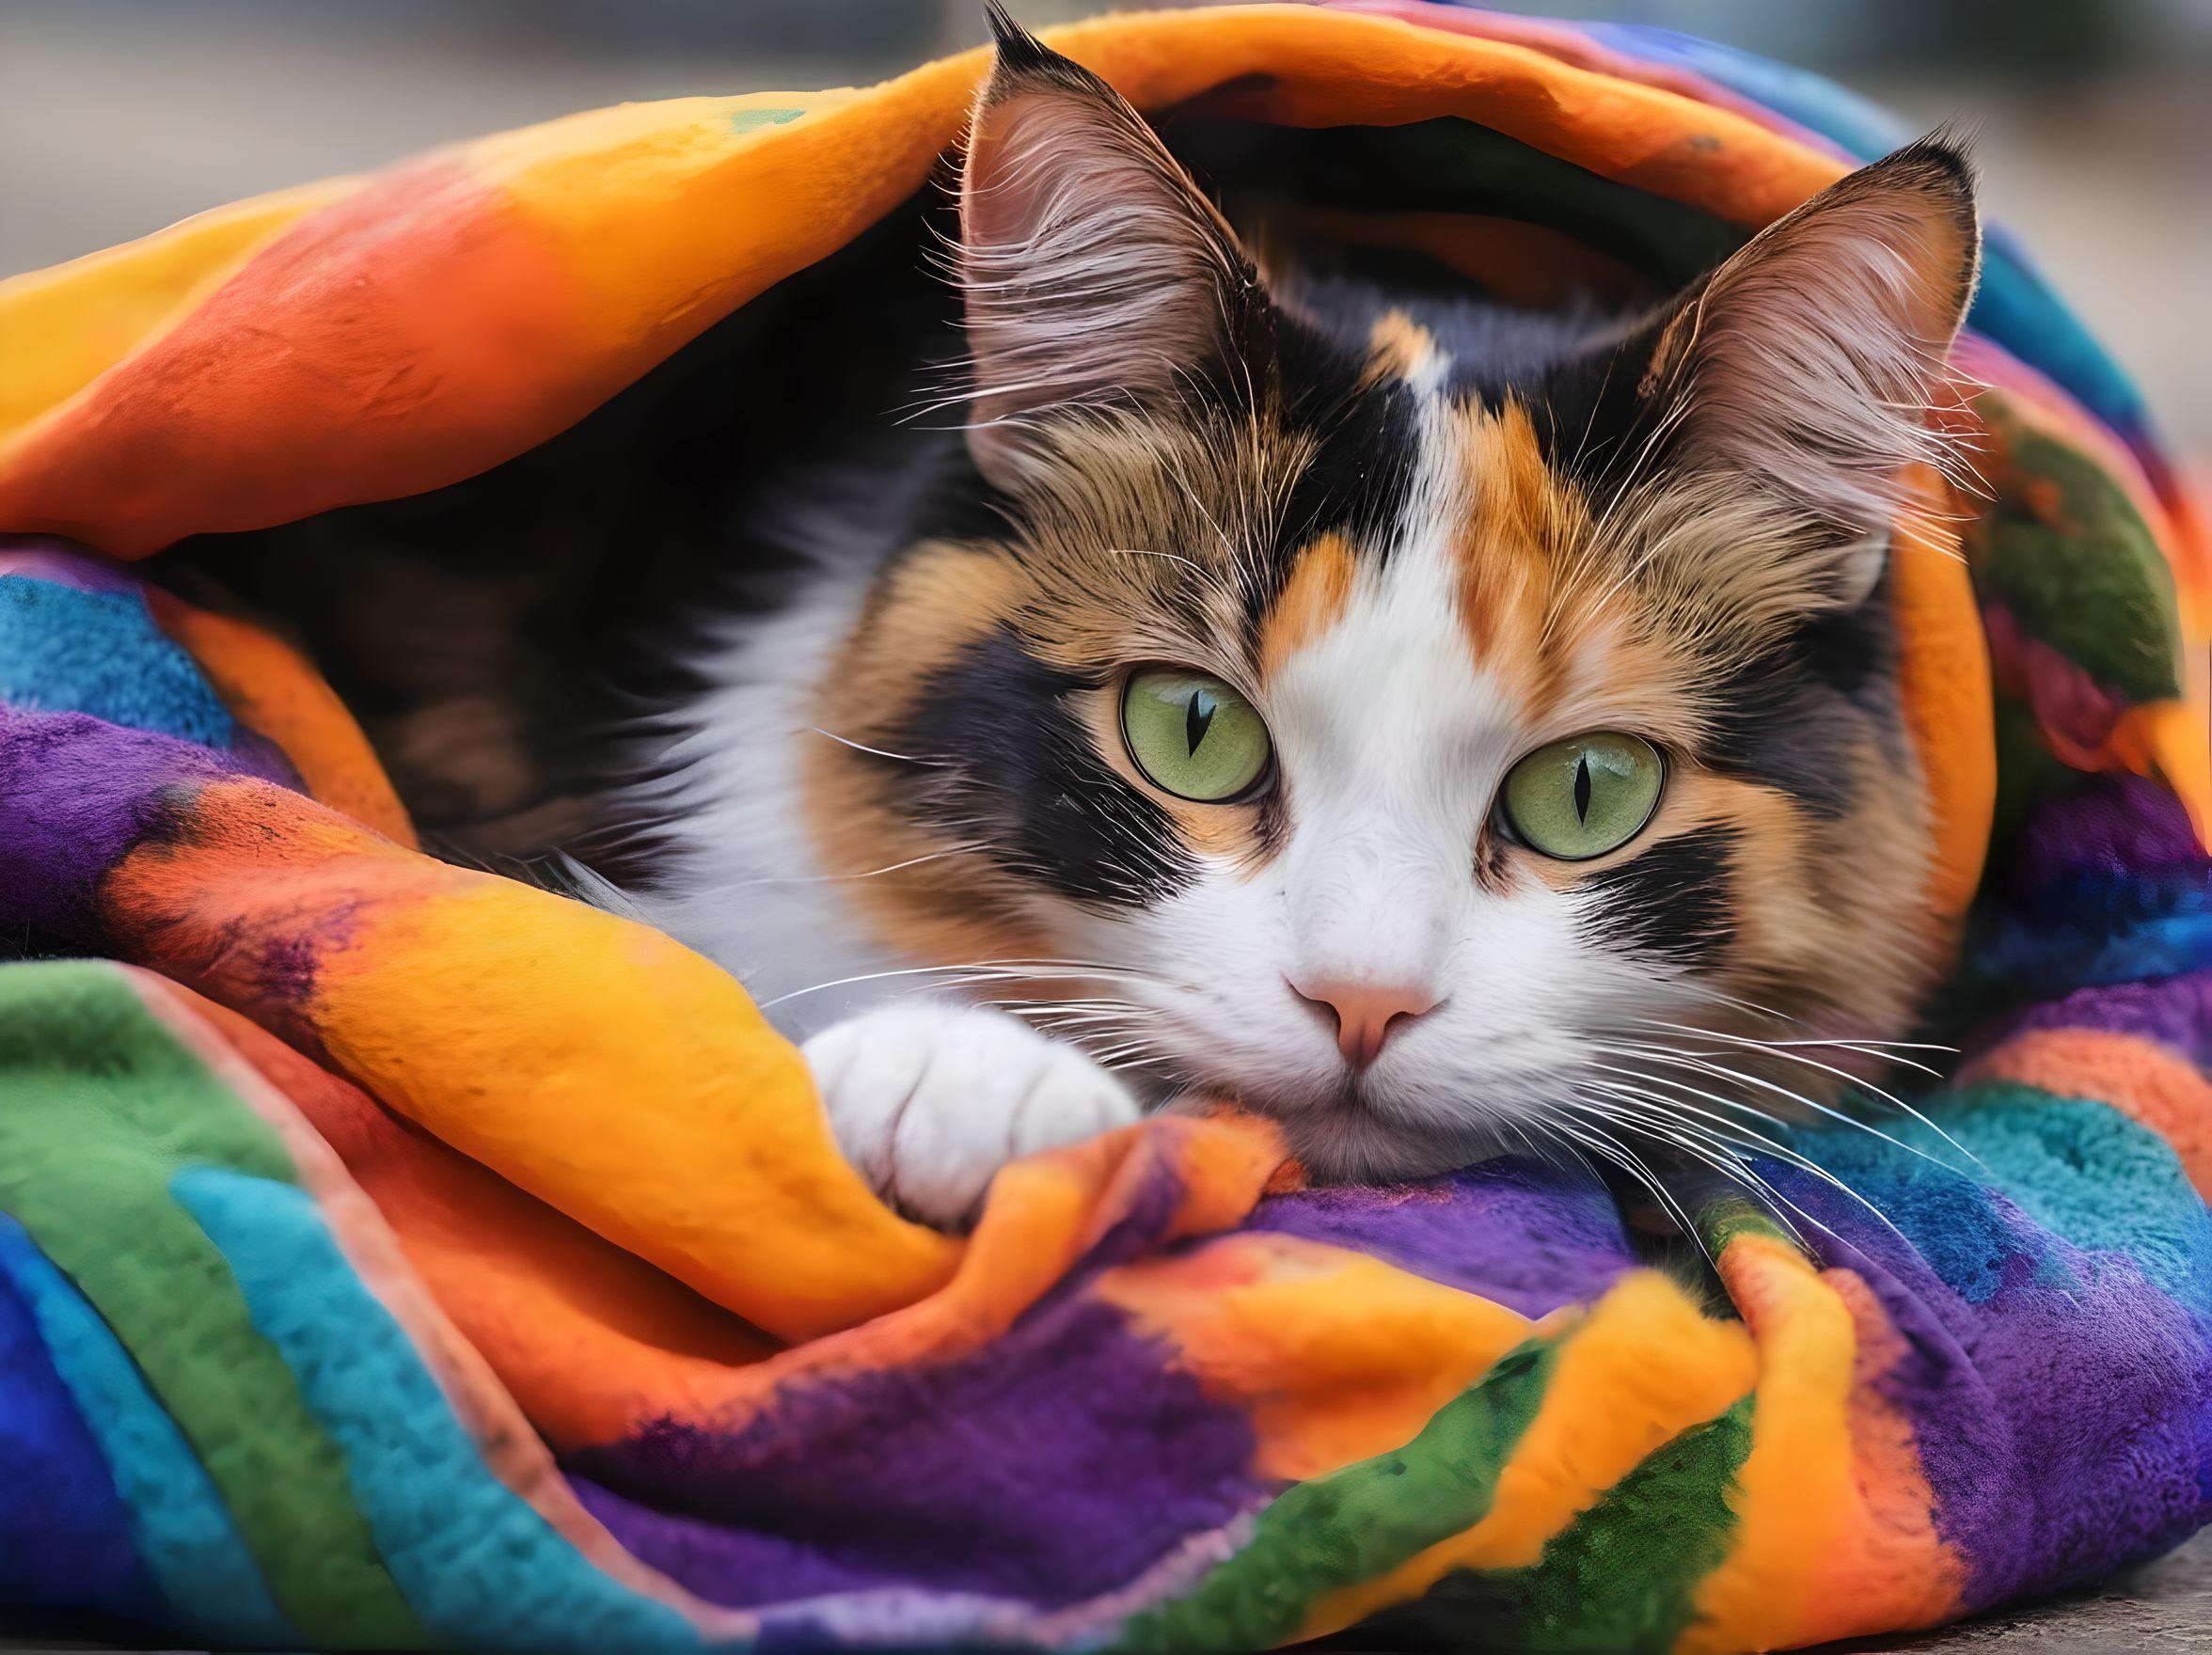 fighting game style score_9- score_8_up- score_7_up- score_6_up- vibrant- source_photo- realistic- a calico cat- with its orange- black- and white fur- is curled up under a vibrant- multicolored blanket. the blanket features hues of yellow- green- blue- and purple- creating a cozy atmosphere. the cat's eyes are closed- suggesting it might be taking a nap or enjoying the warmth of the blanket.- colorful city background . one on one combat- combo moves- diverse character roster- baby cat